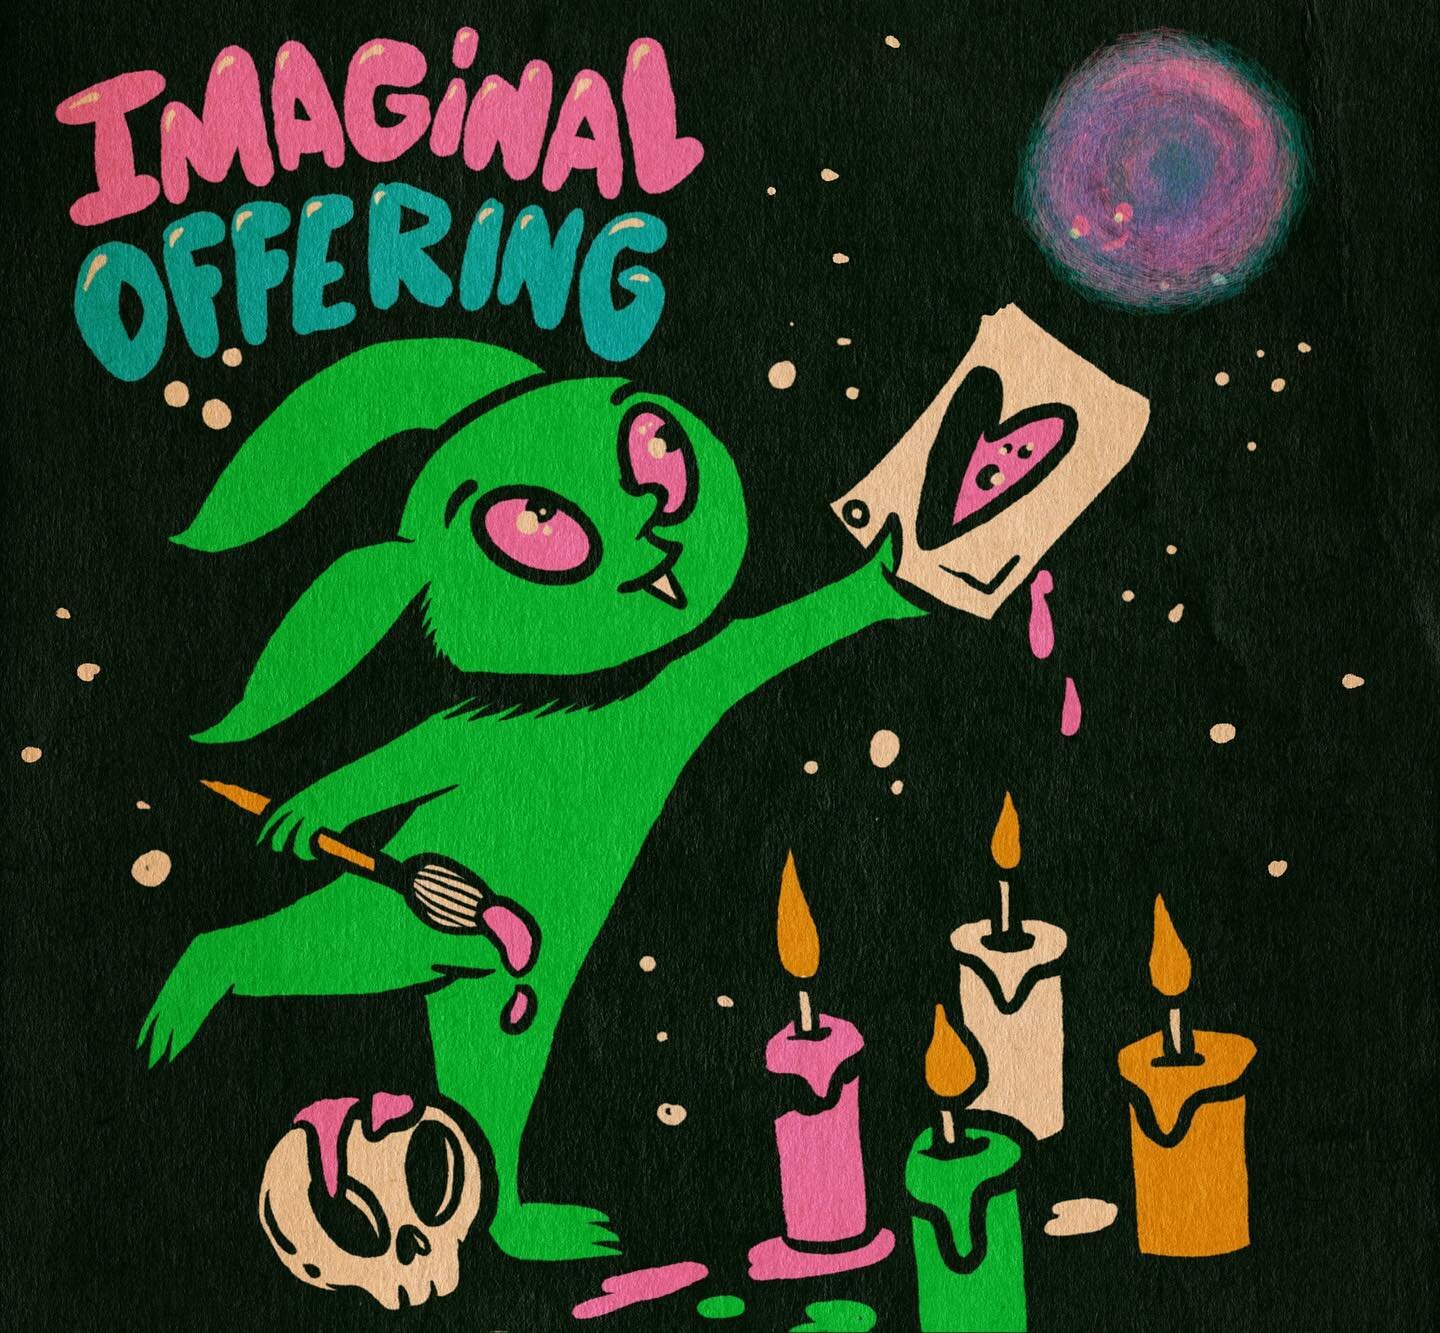 Imaginal Offerings. 💖

Had an awesome chat with @tracingowls about all things imaginal and weird. It&rsquo;s a 2hr stream of consciousness conversation that was truly a blast. You can give it a listen now wherever ya check out podcasts. Have the bes